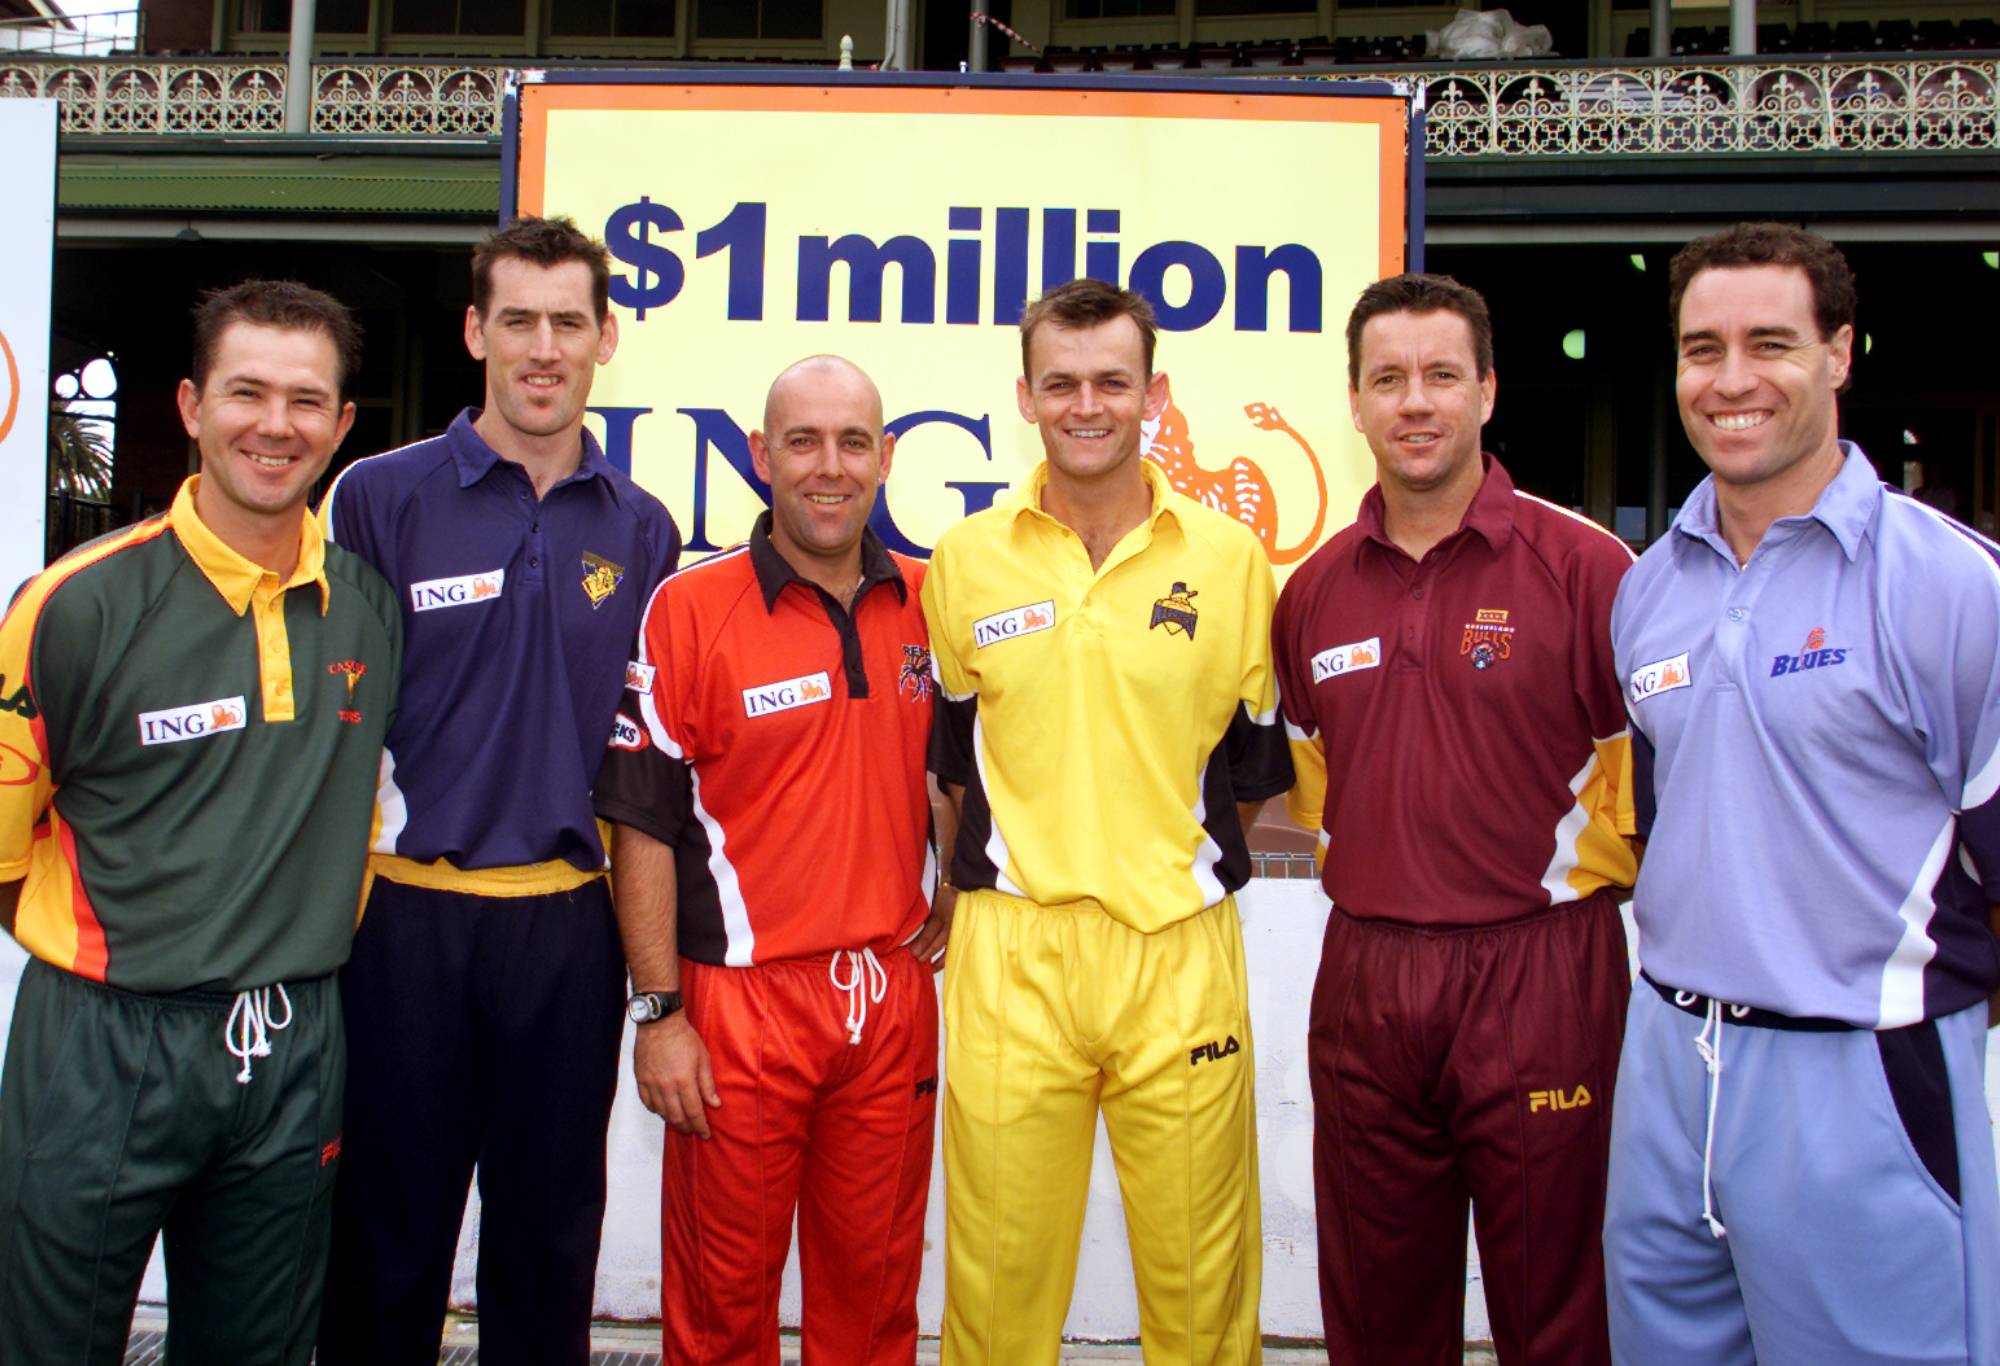 04 Oct 2001:   Team captains pose for a photo at the season launch of the ING Cup held at the Sydney Cricket Ground in Sydney, Australia. DIGITAL IMAGE. Mandatory Credit: Scott Barbour/ALLSPORT